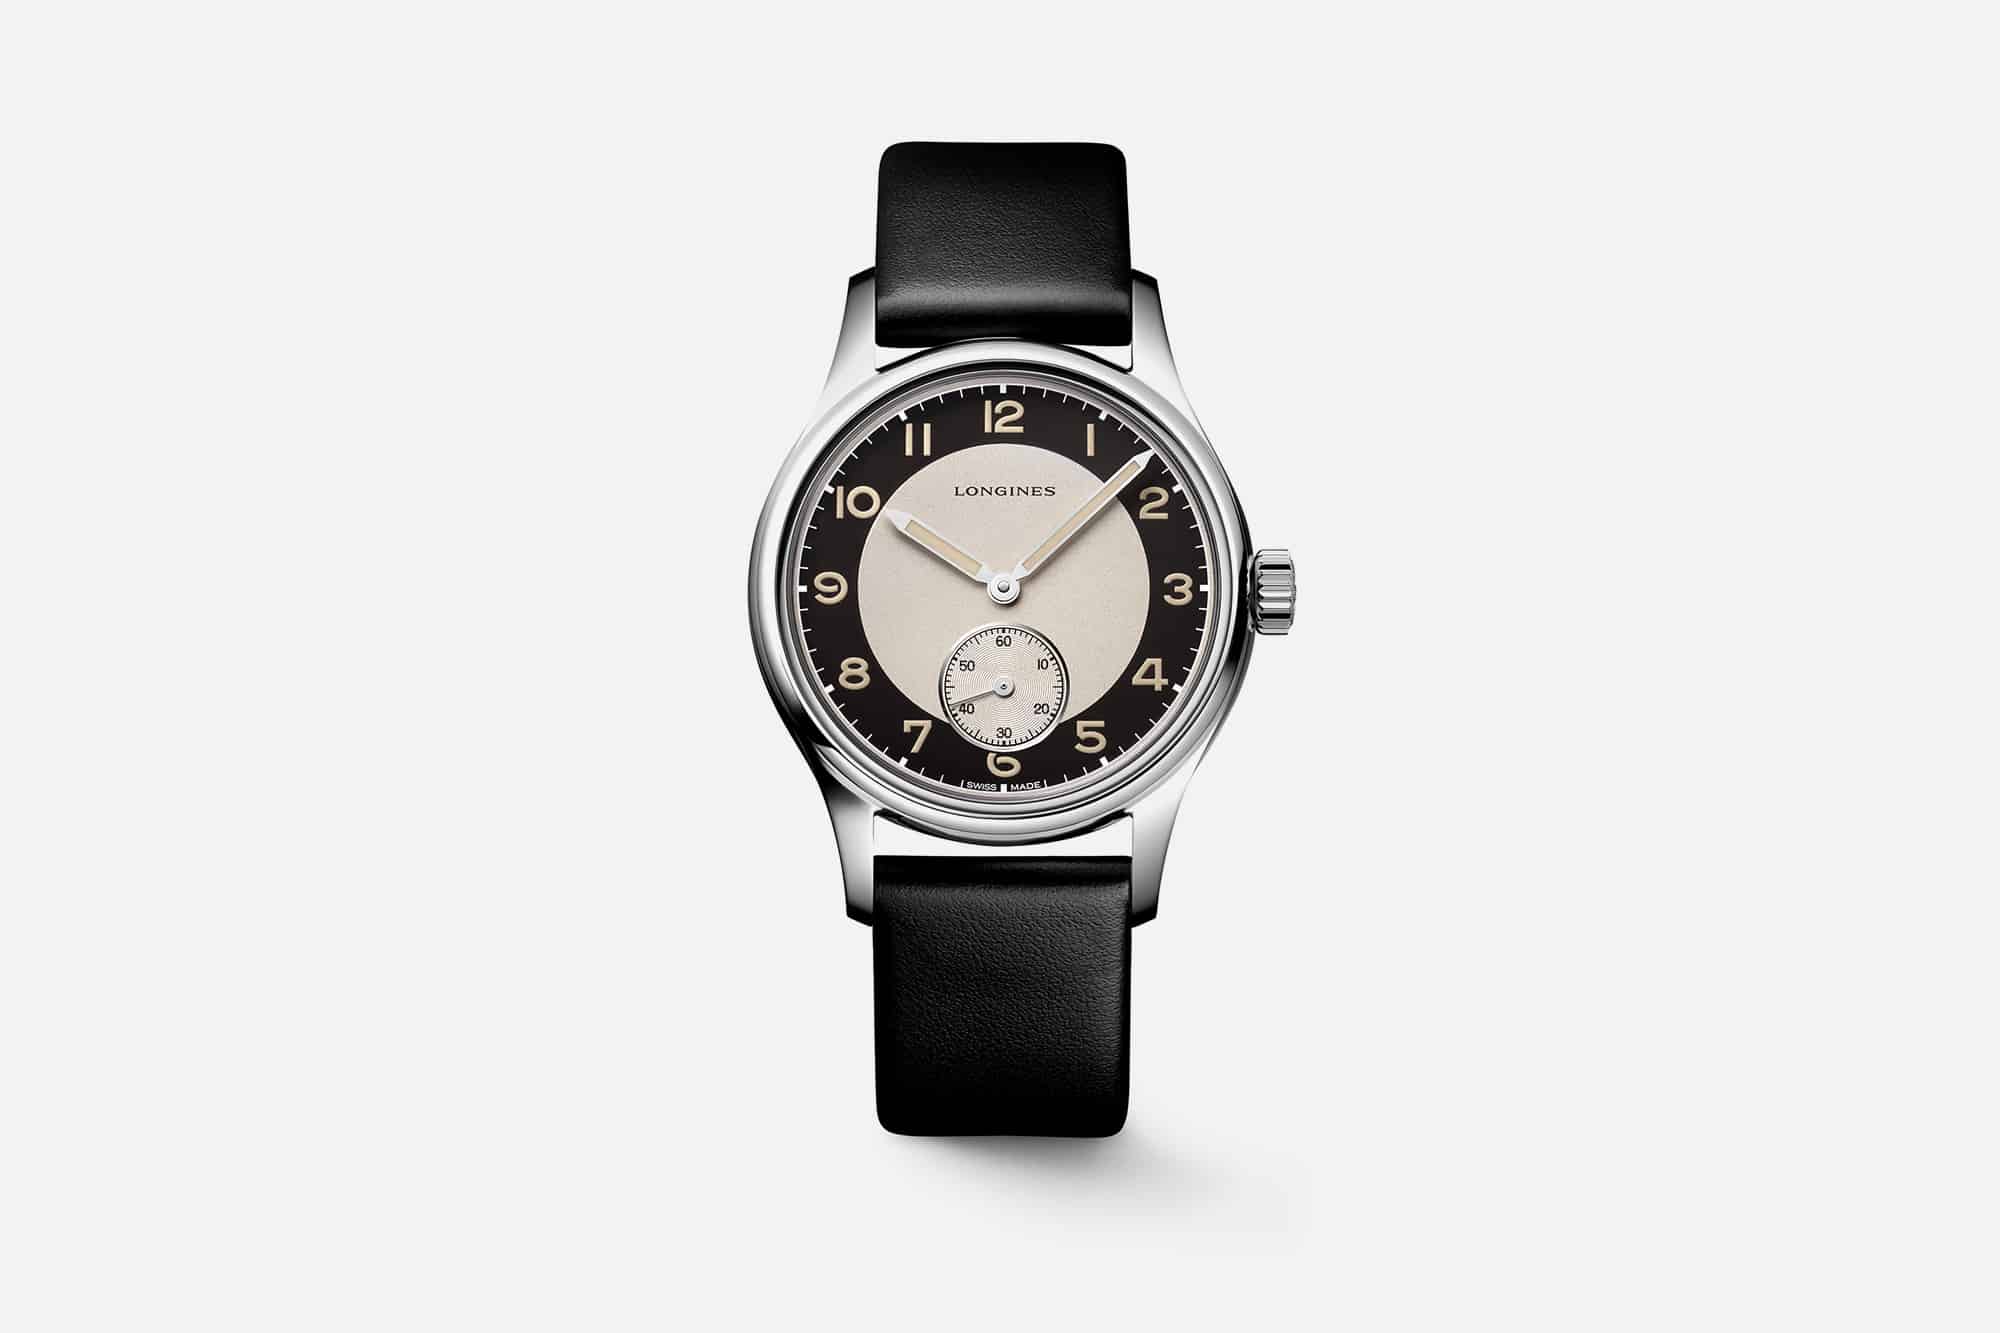 Longines Looks to the 1940s With the New “Tuxedo” Heritage Classics